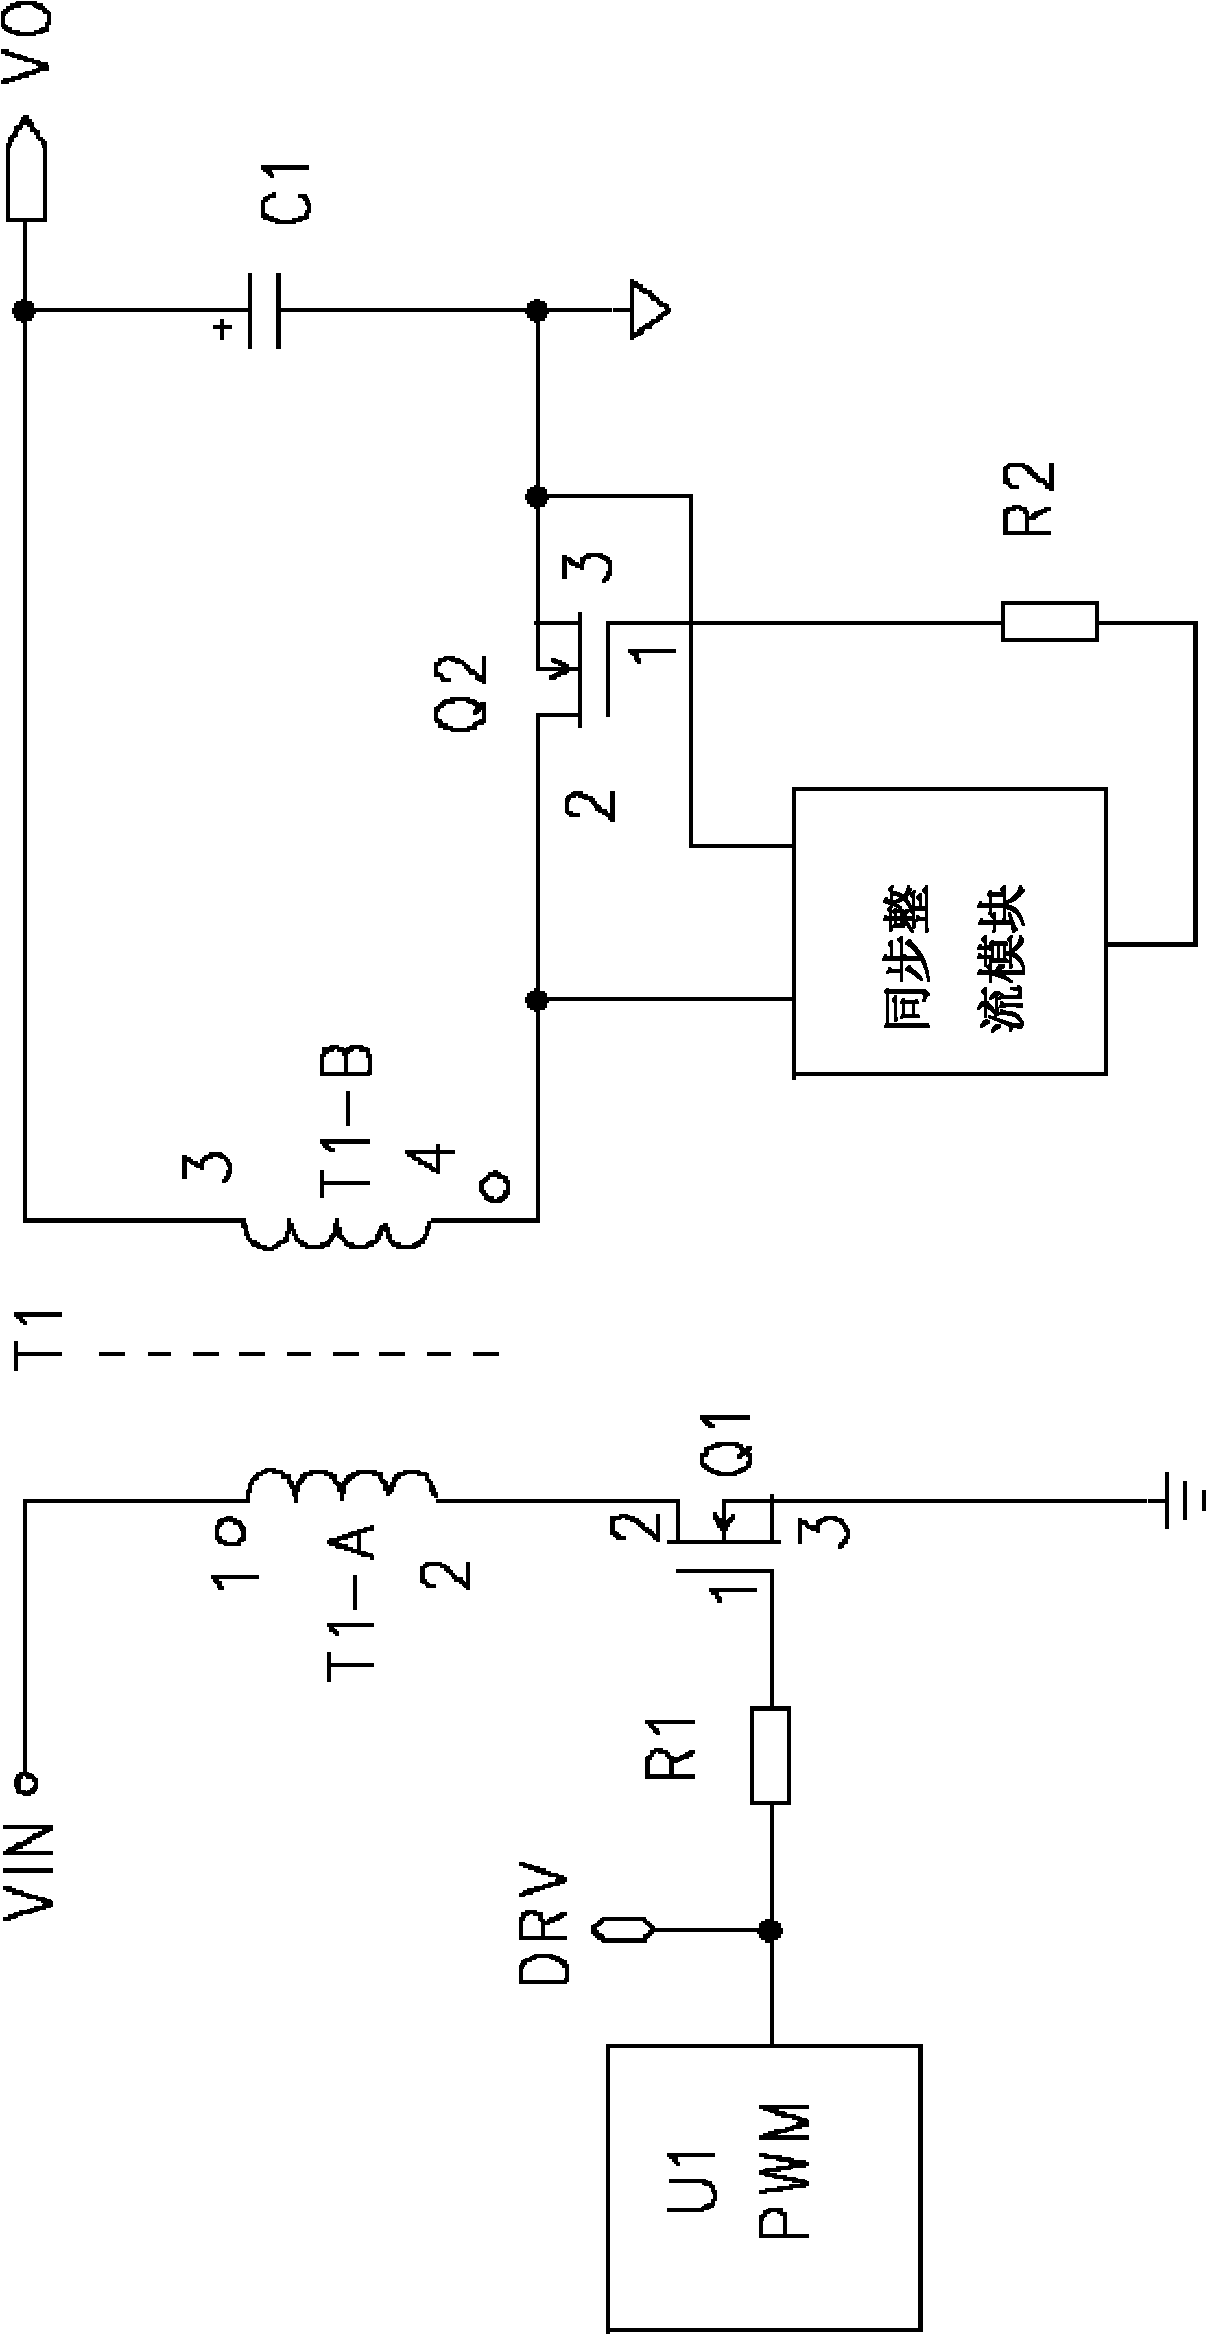 Flyback synchronous rectification control circuit